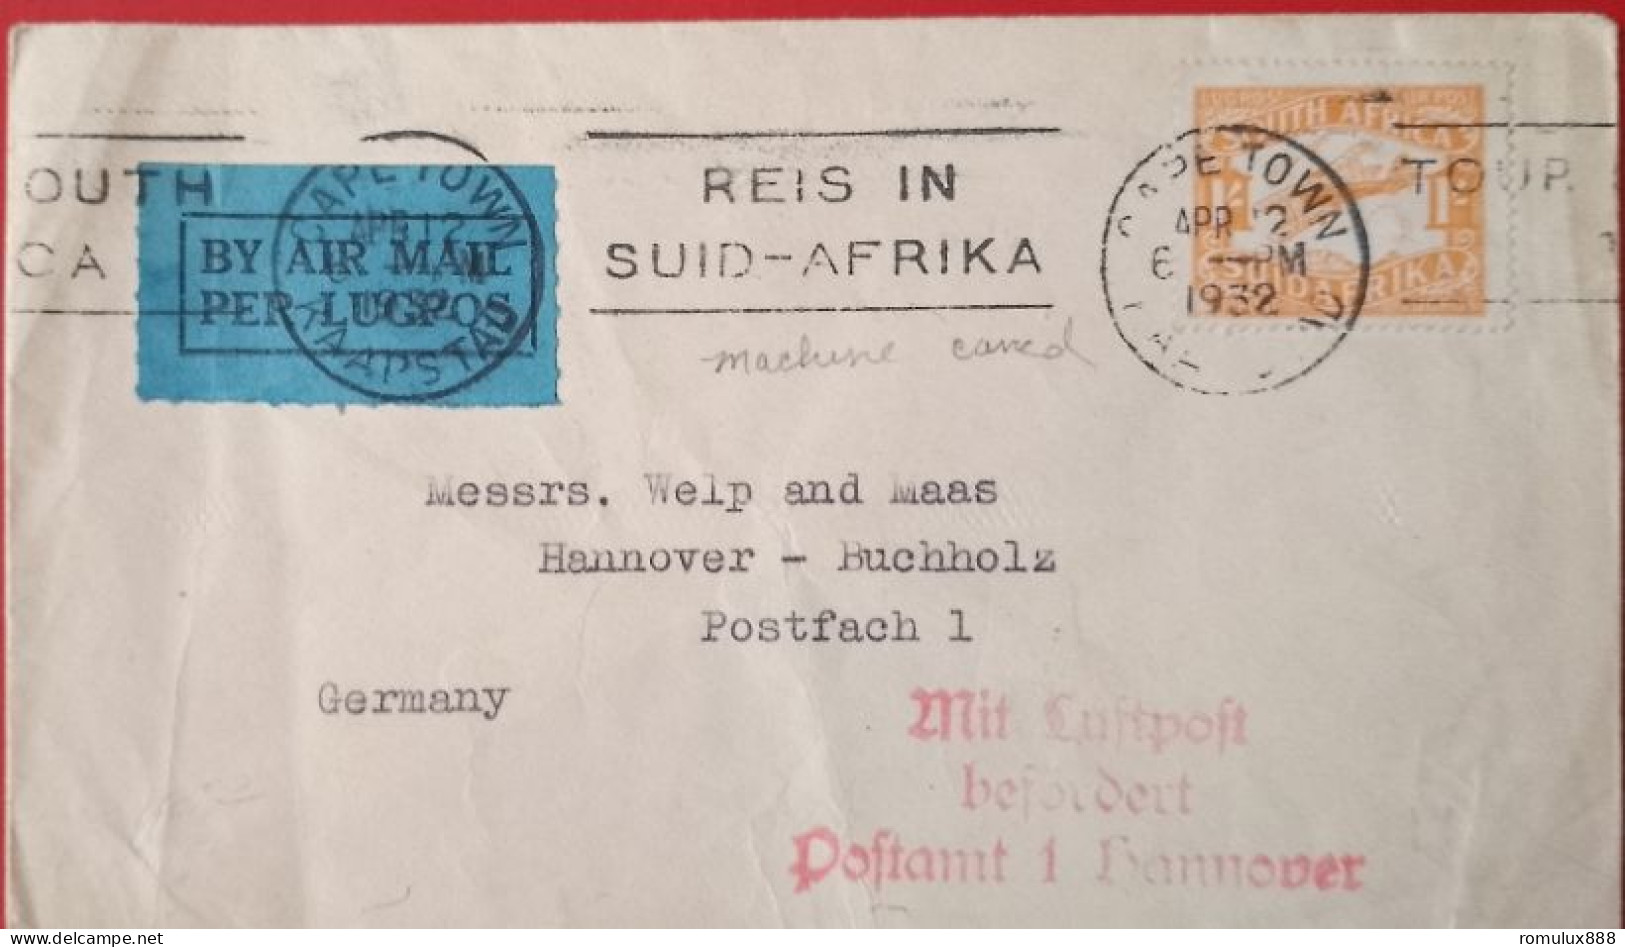 IMPERIAL AIRWAYS 1932 CAPETOWN TO HANNOVER FLIGHT COVER - Aéreo